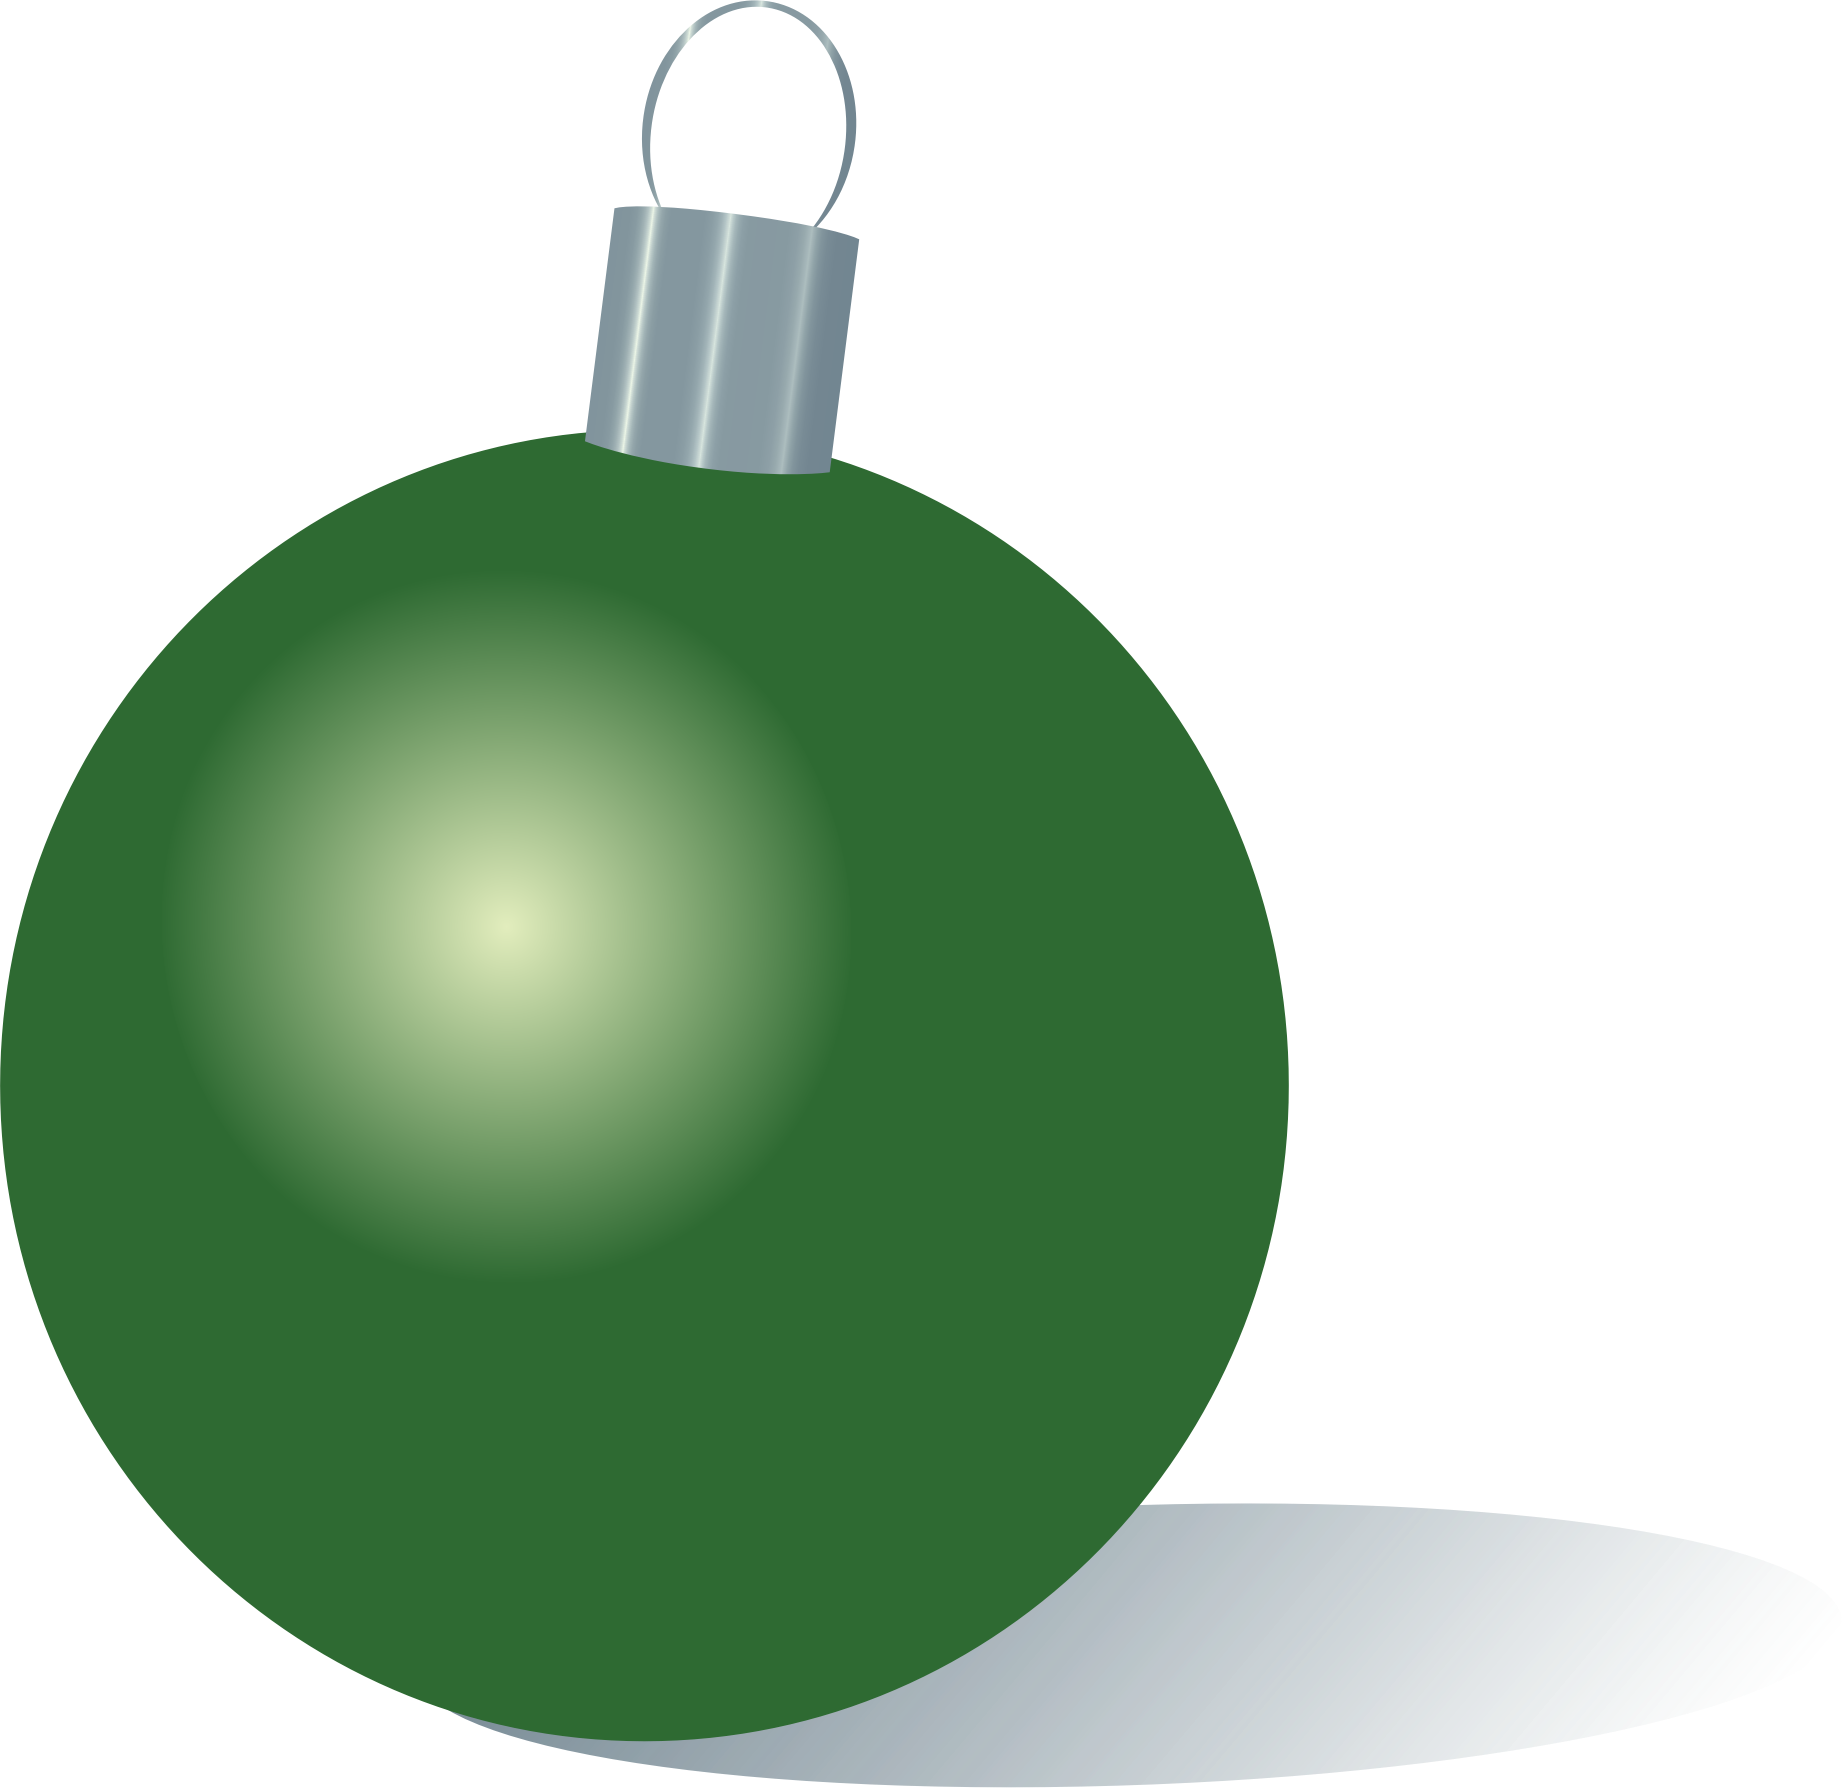 Picture Green Christmas Ornaments Download HQ PNG Image